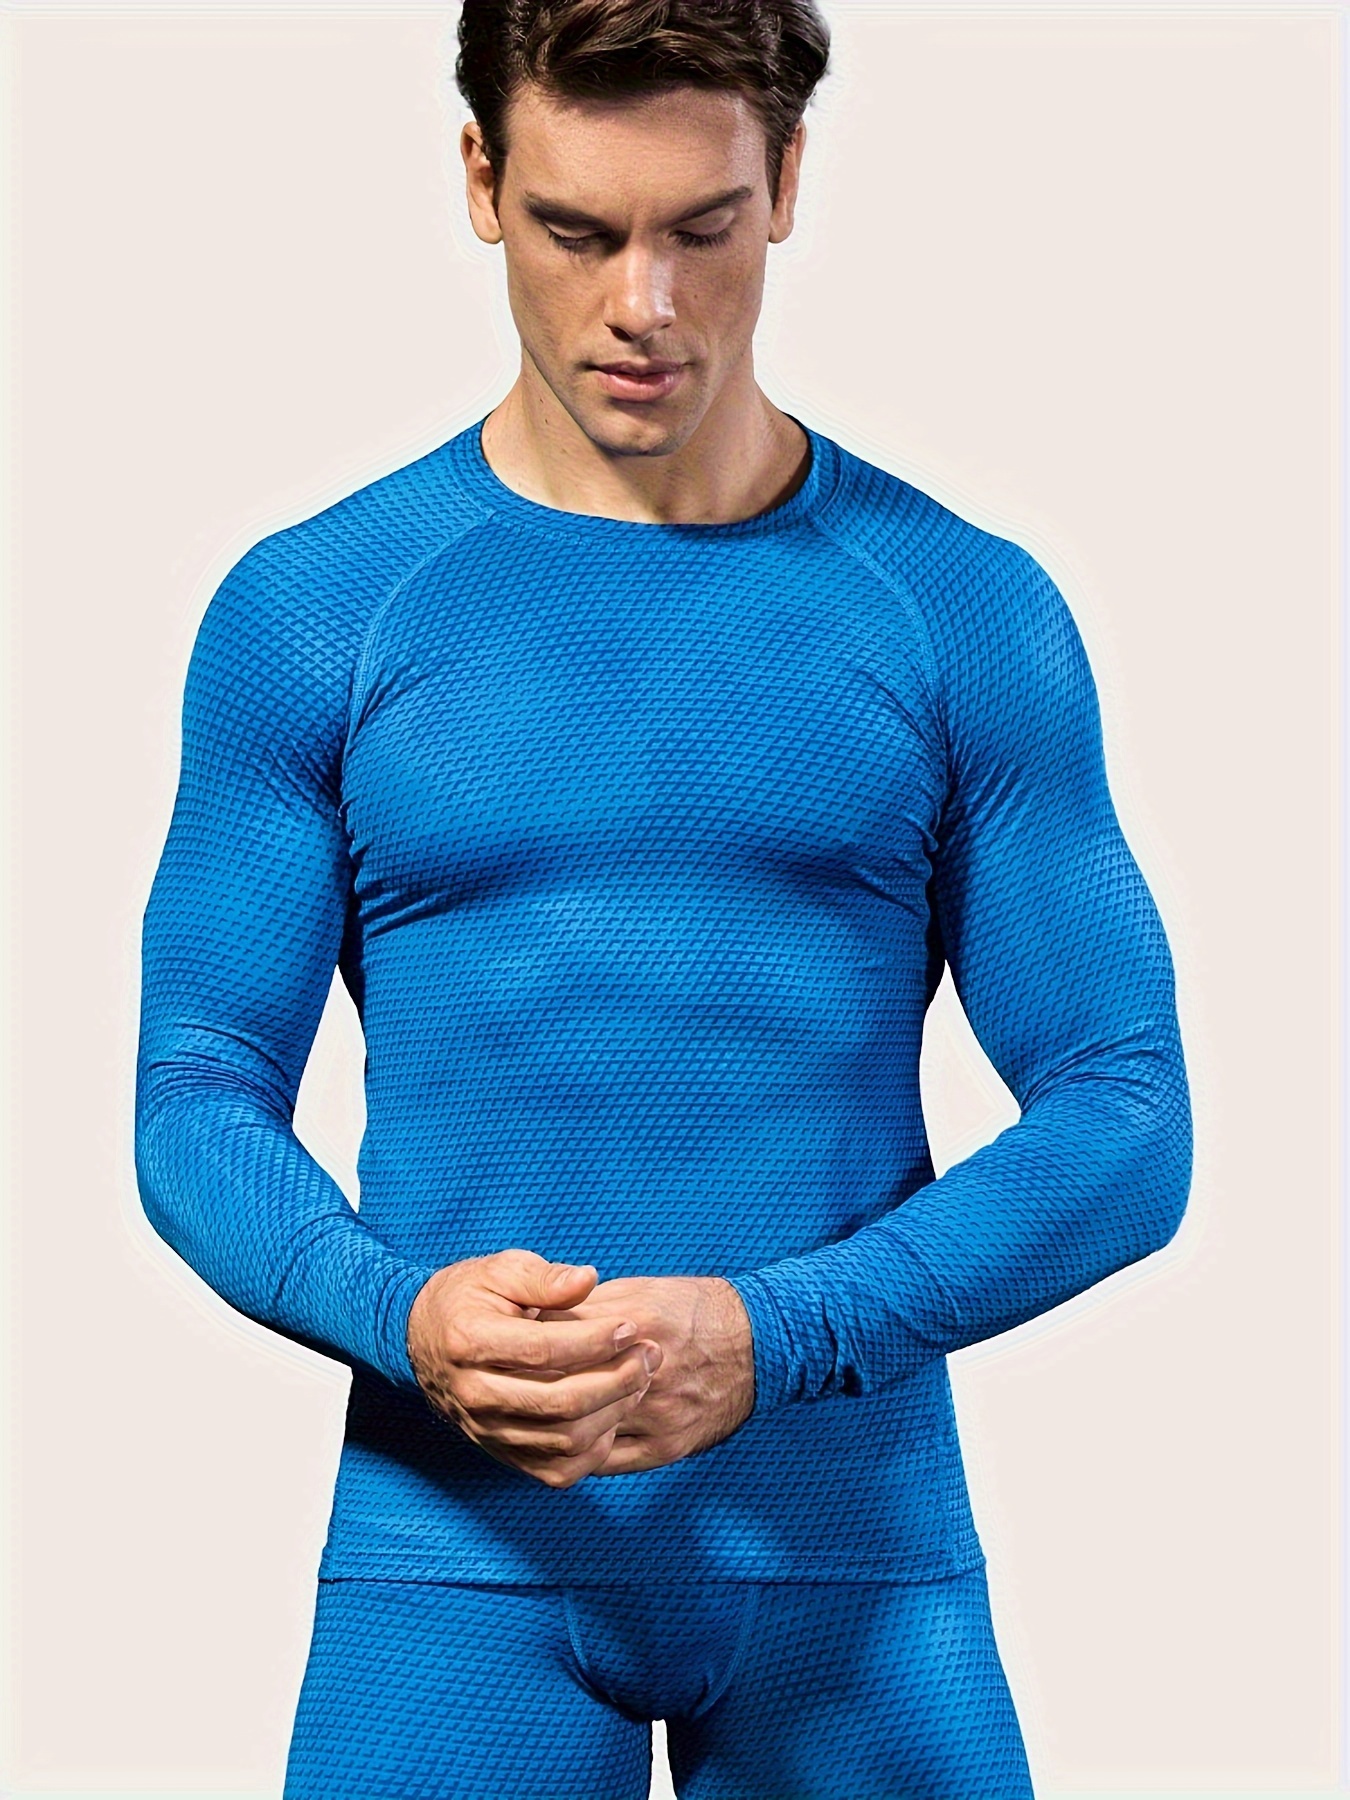 Winter Thermal Underwear Suit Men Compression Sportswear Fitness Clothes  Long Shirts Pants Warm Base Layer Sport - AliExpress